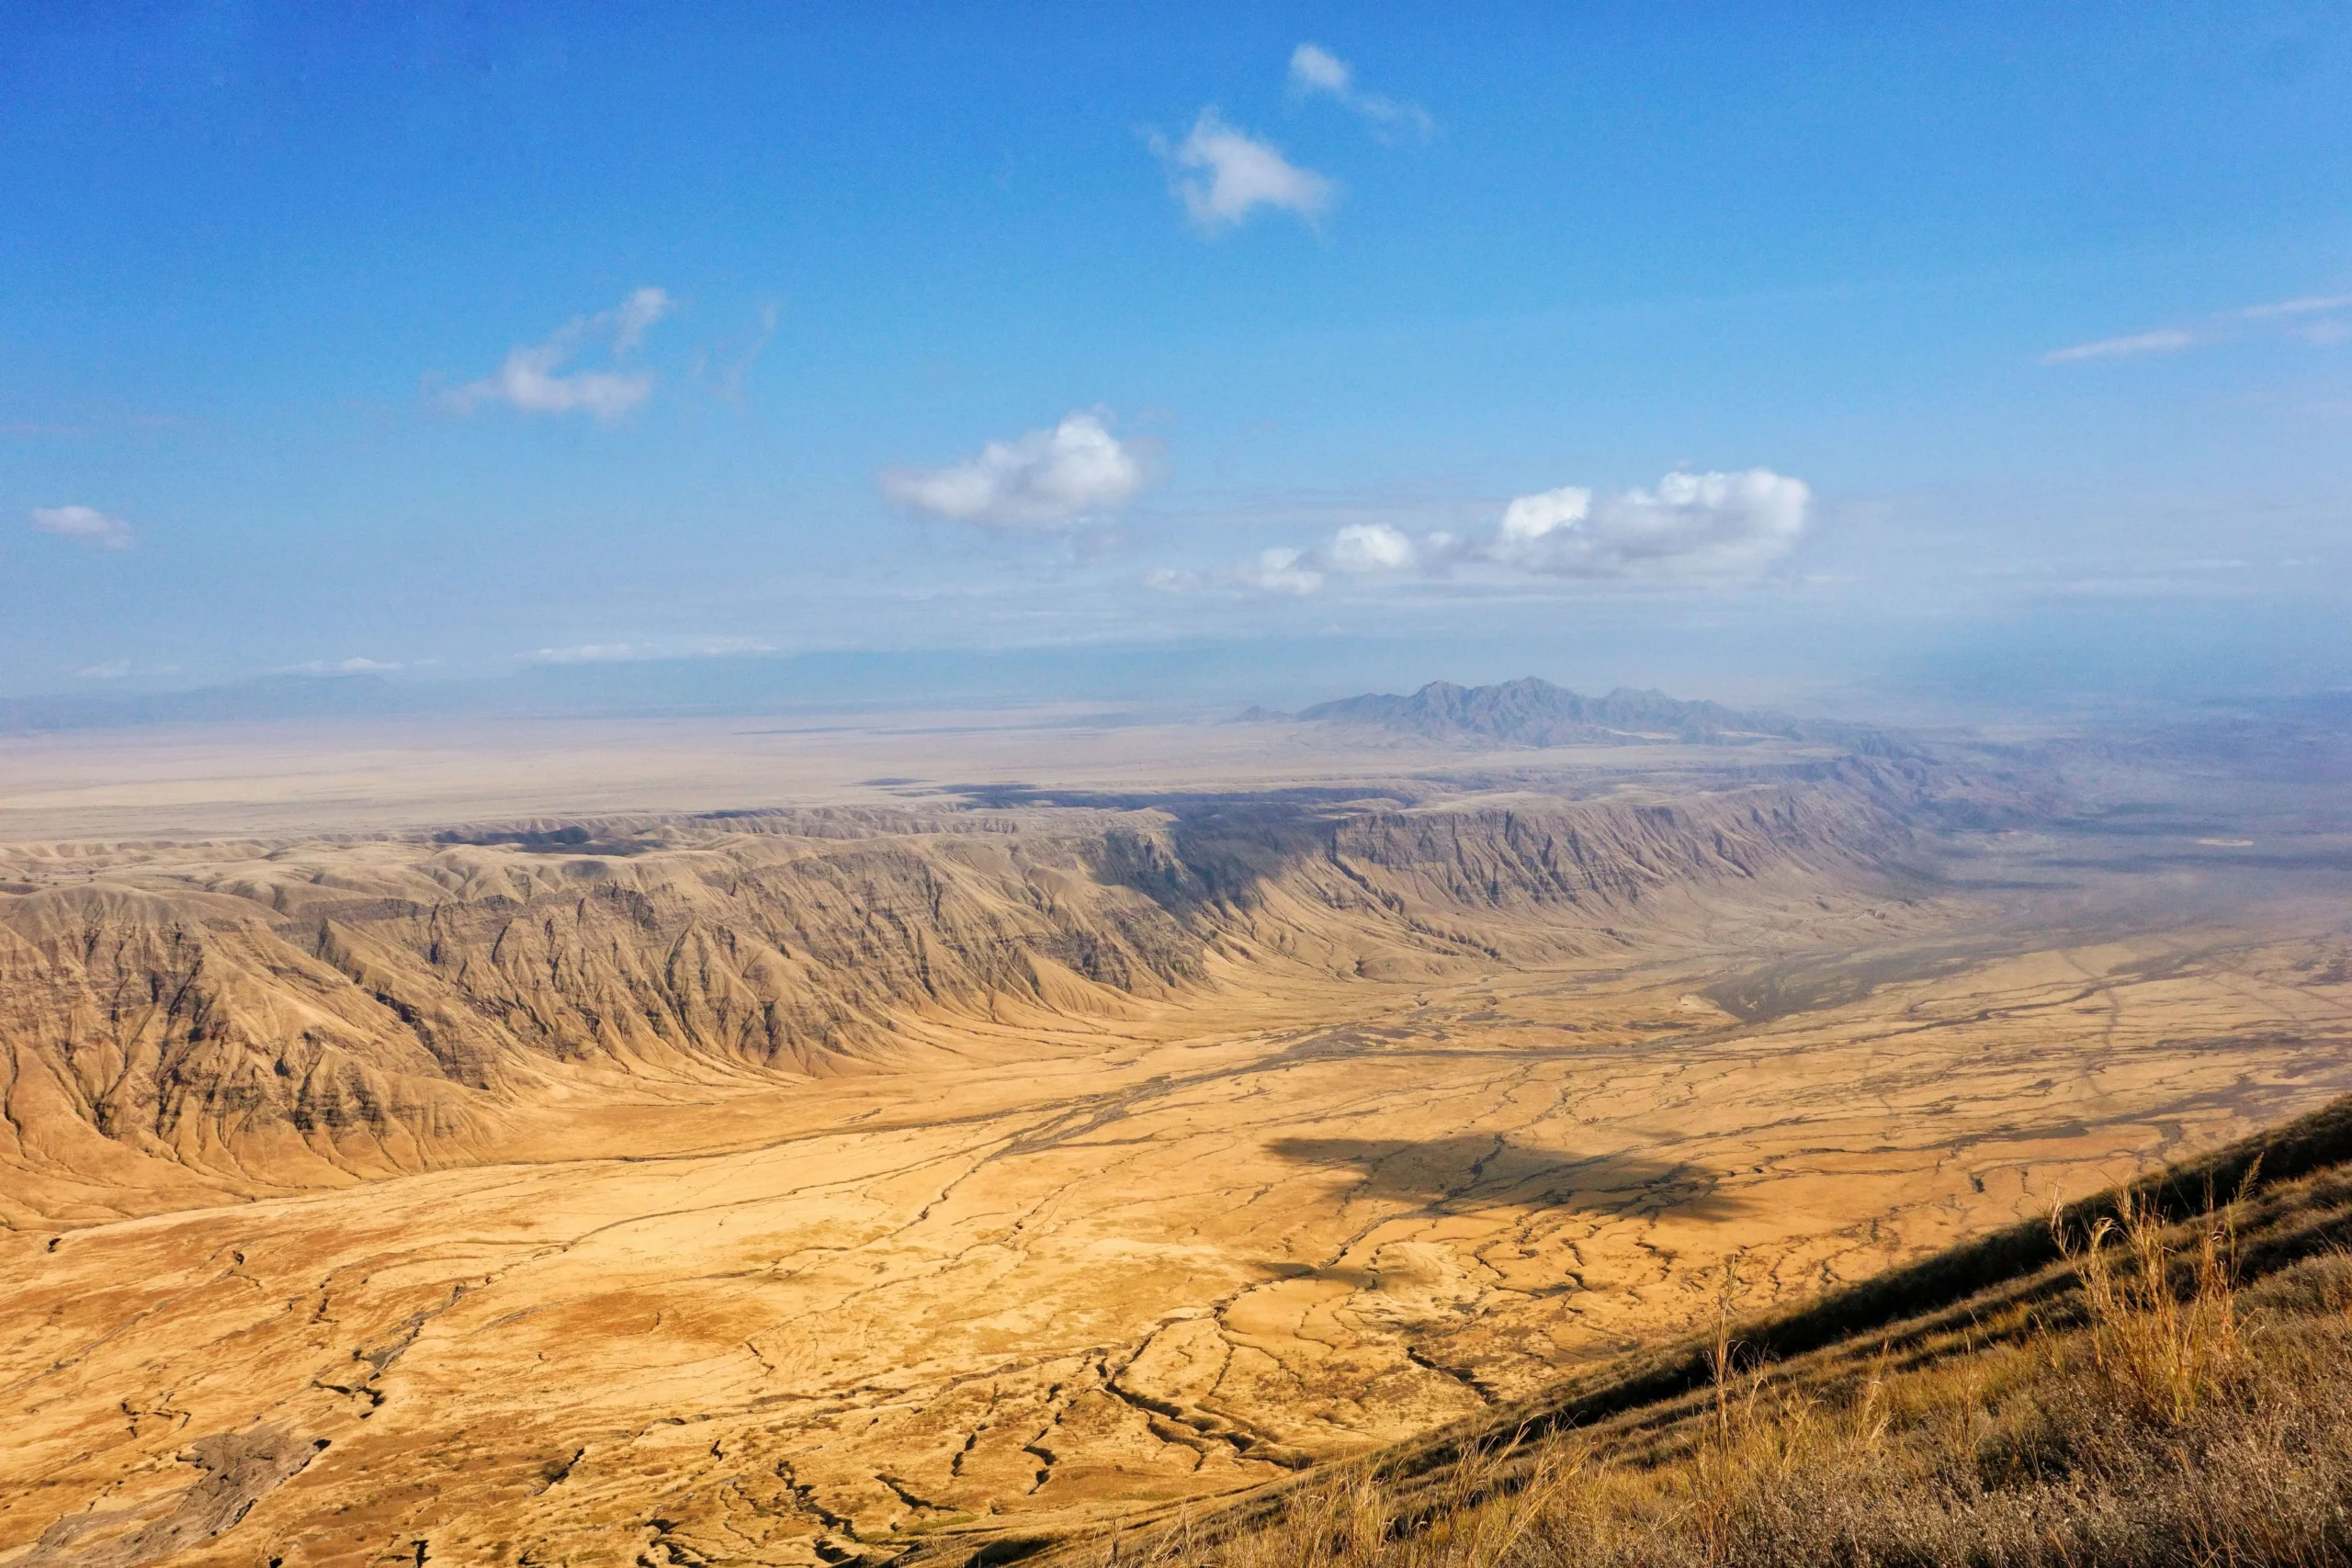 View of the rift valley from Ol Doinyo Lengai